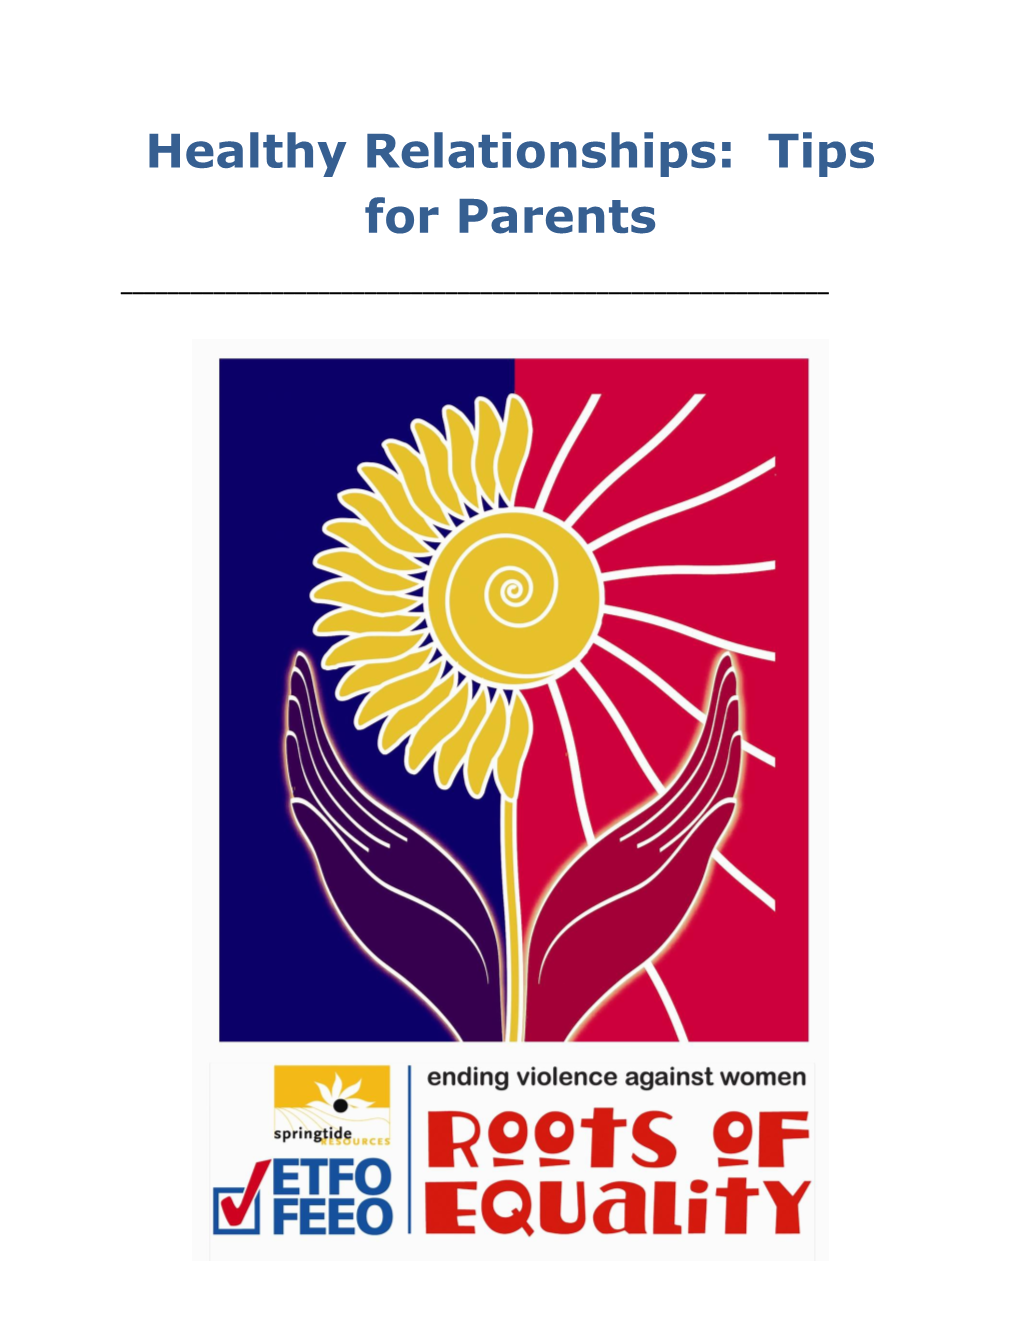 Healthy Relationships: Tips for Parents